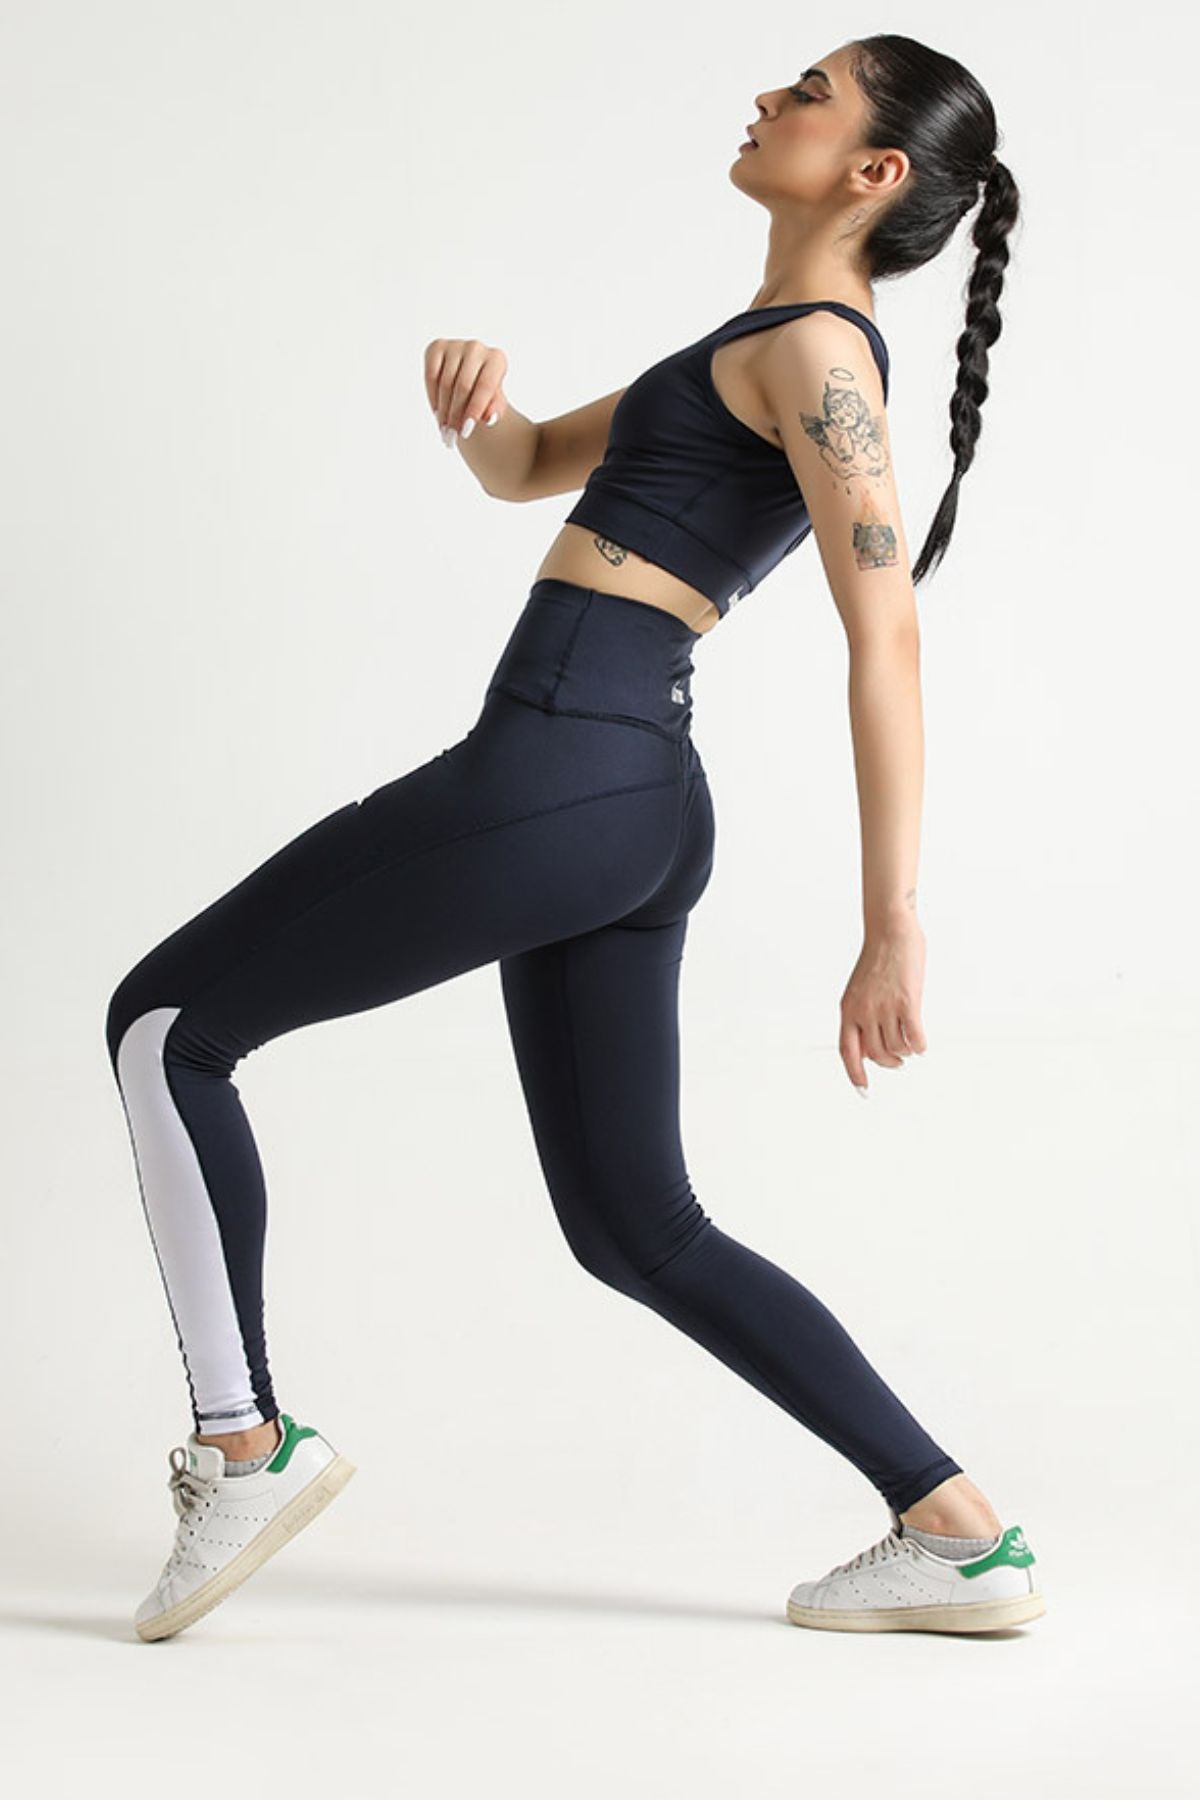 LUNA HURRICANE CONTRAST HIGH WAISTED LEGGINGS - The Orion Fit